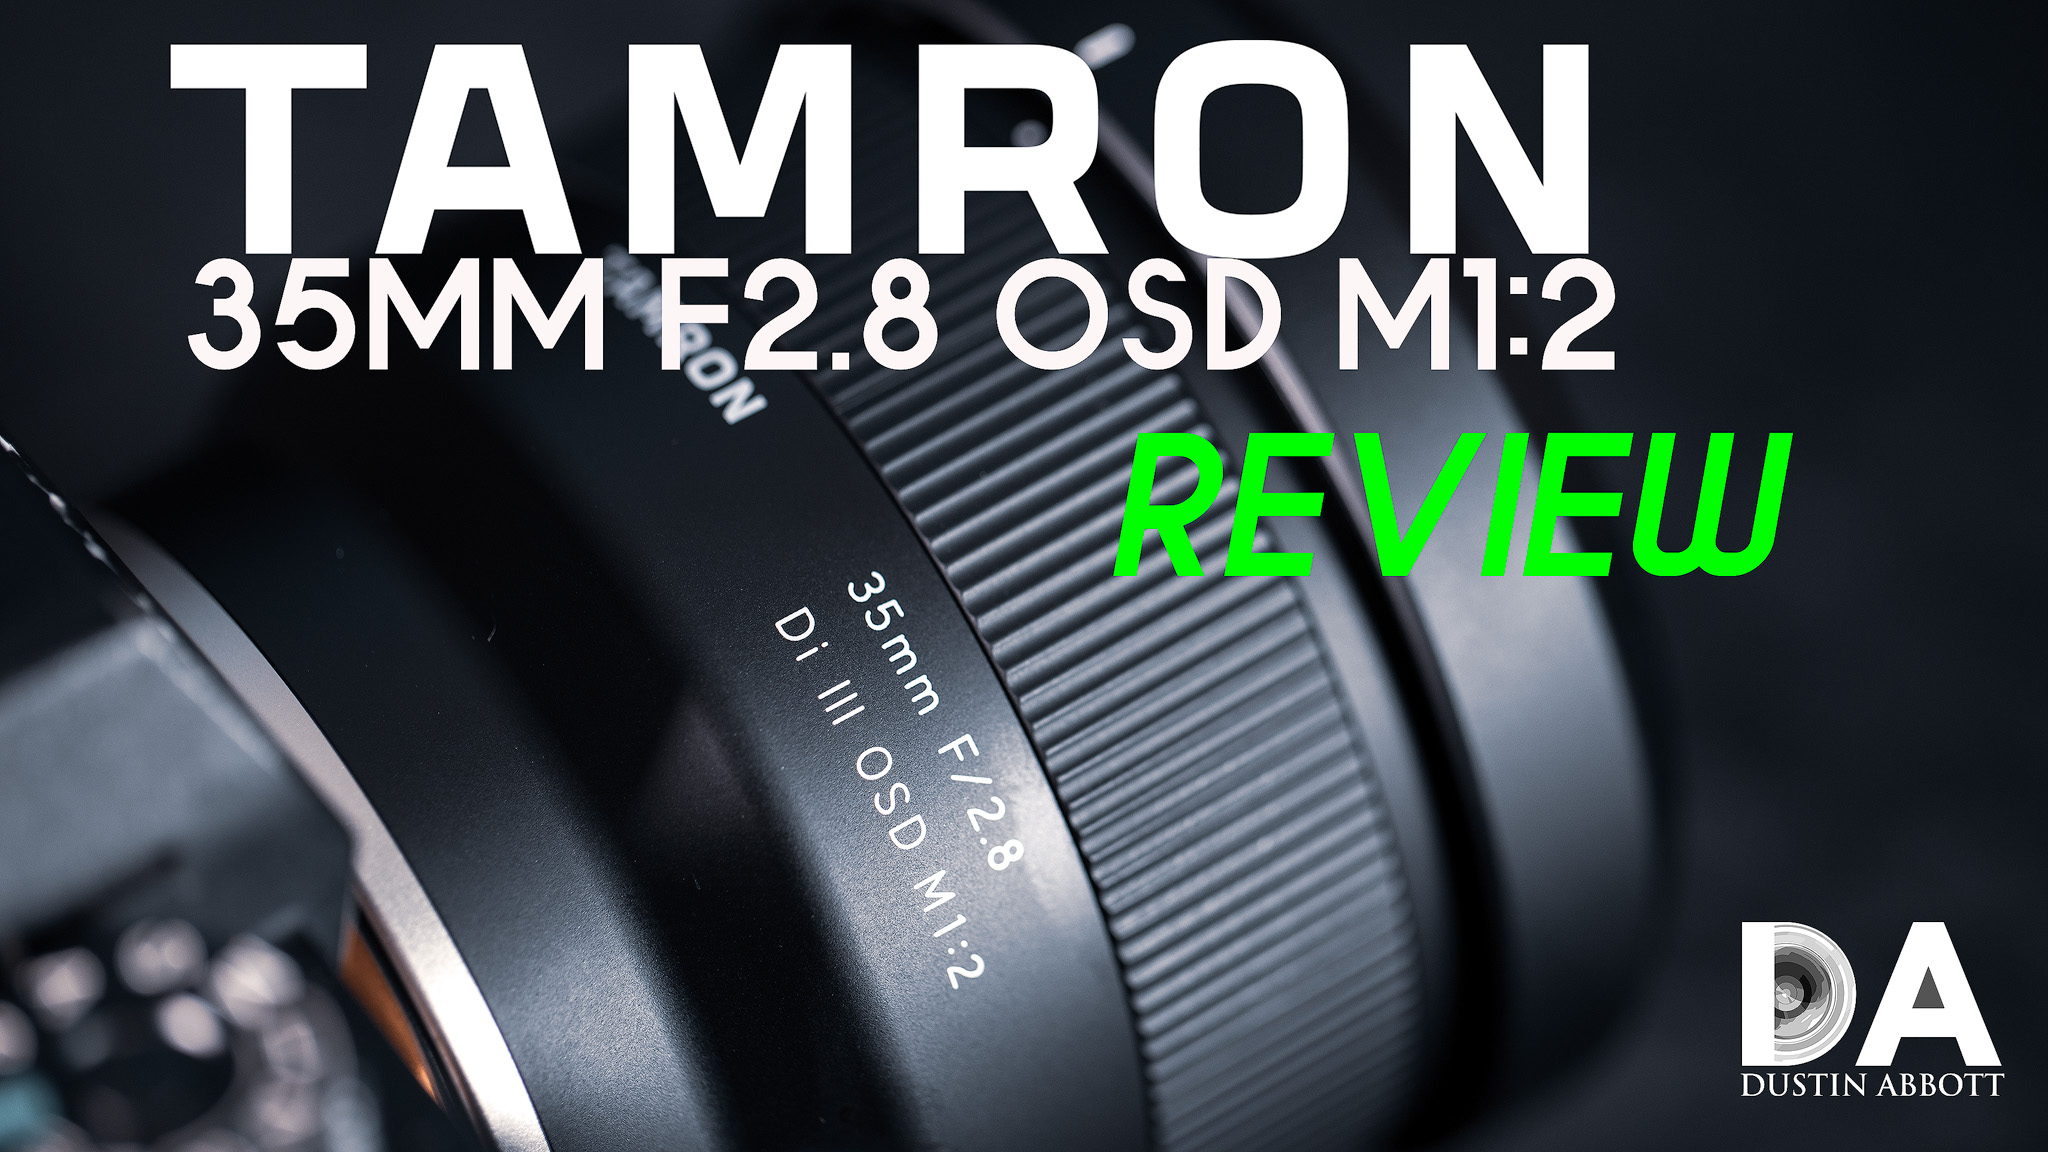 Tamron 35mm F2.8 M1:2 Review Part 1 | 4K